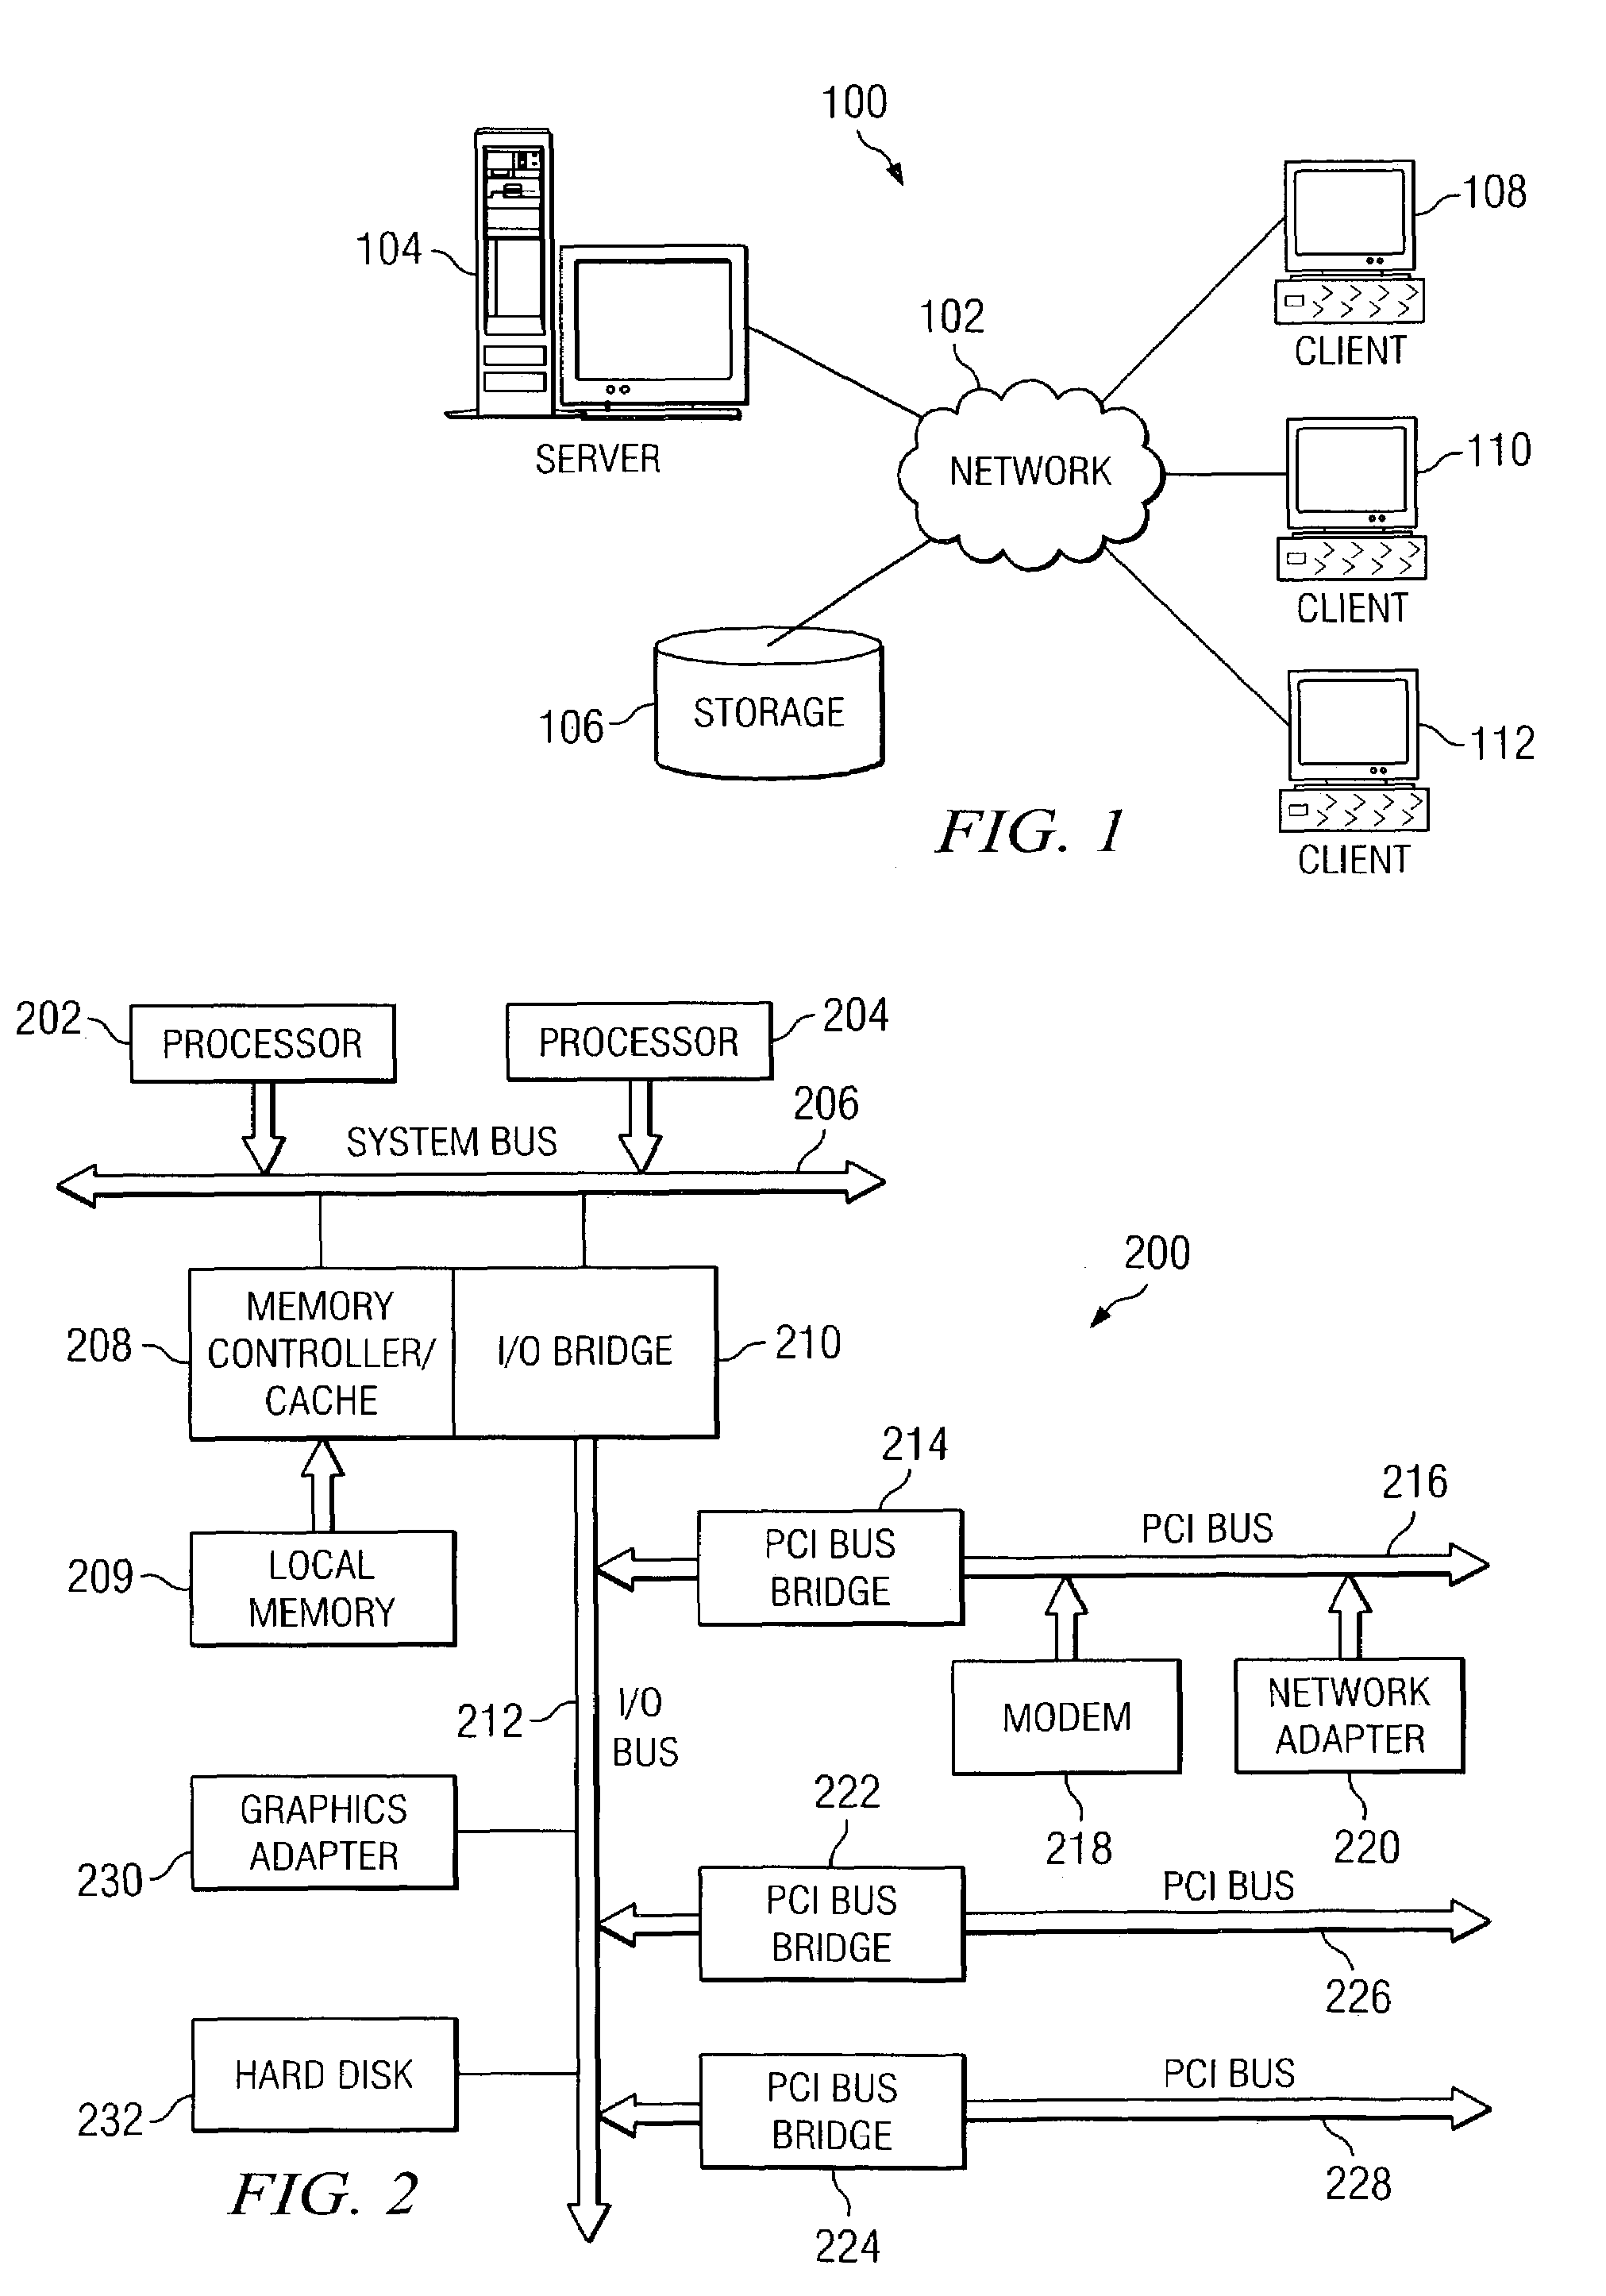 Apparatus and method for flexible web service deployment